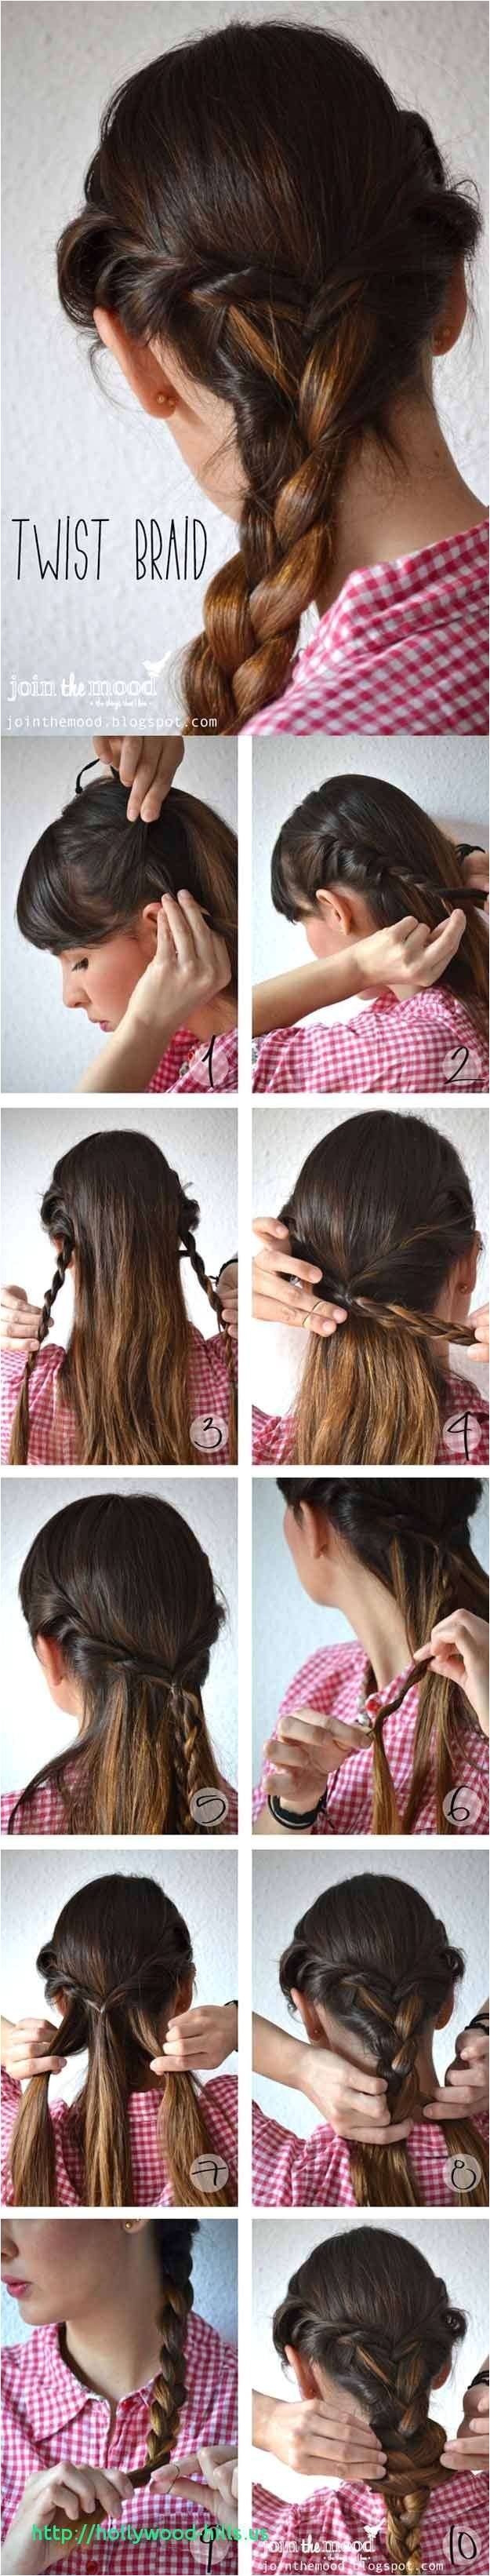 Easy School Hairstyles For Girls Best Trend Cute First Day School Hairstyles